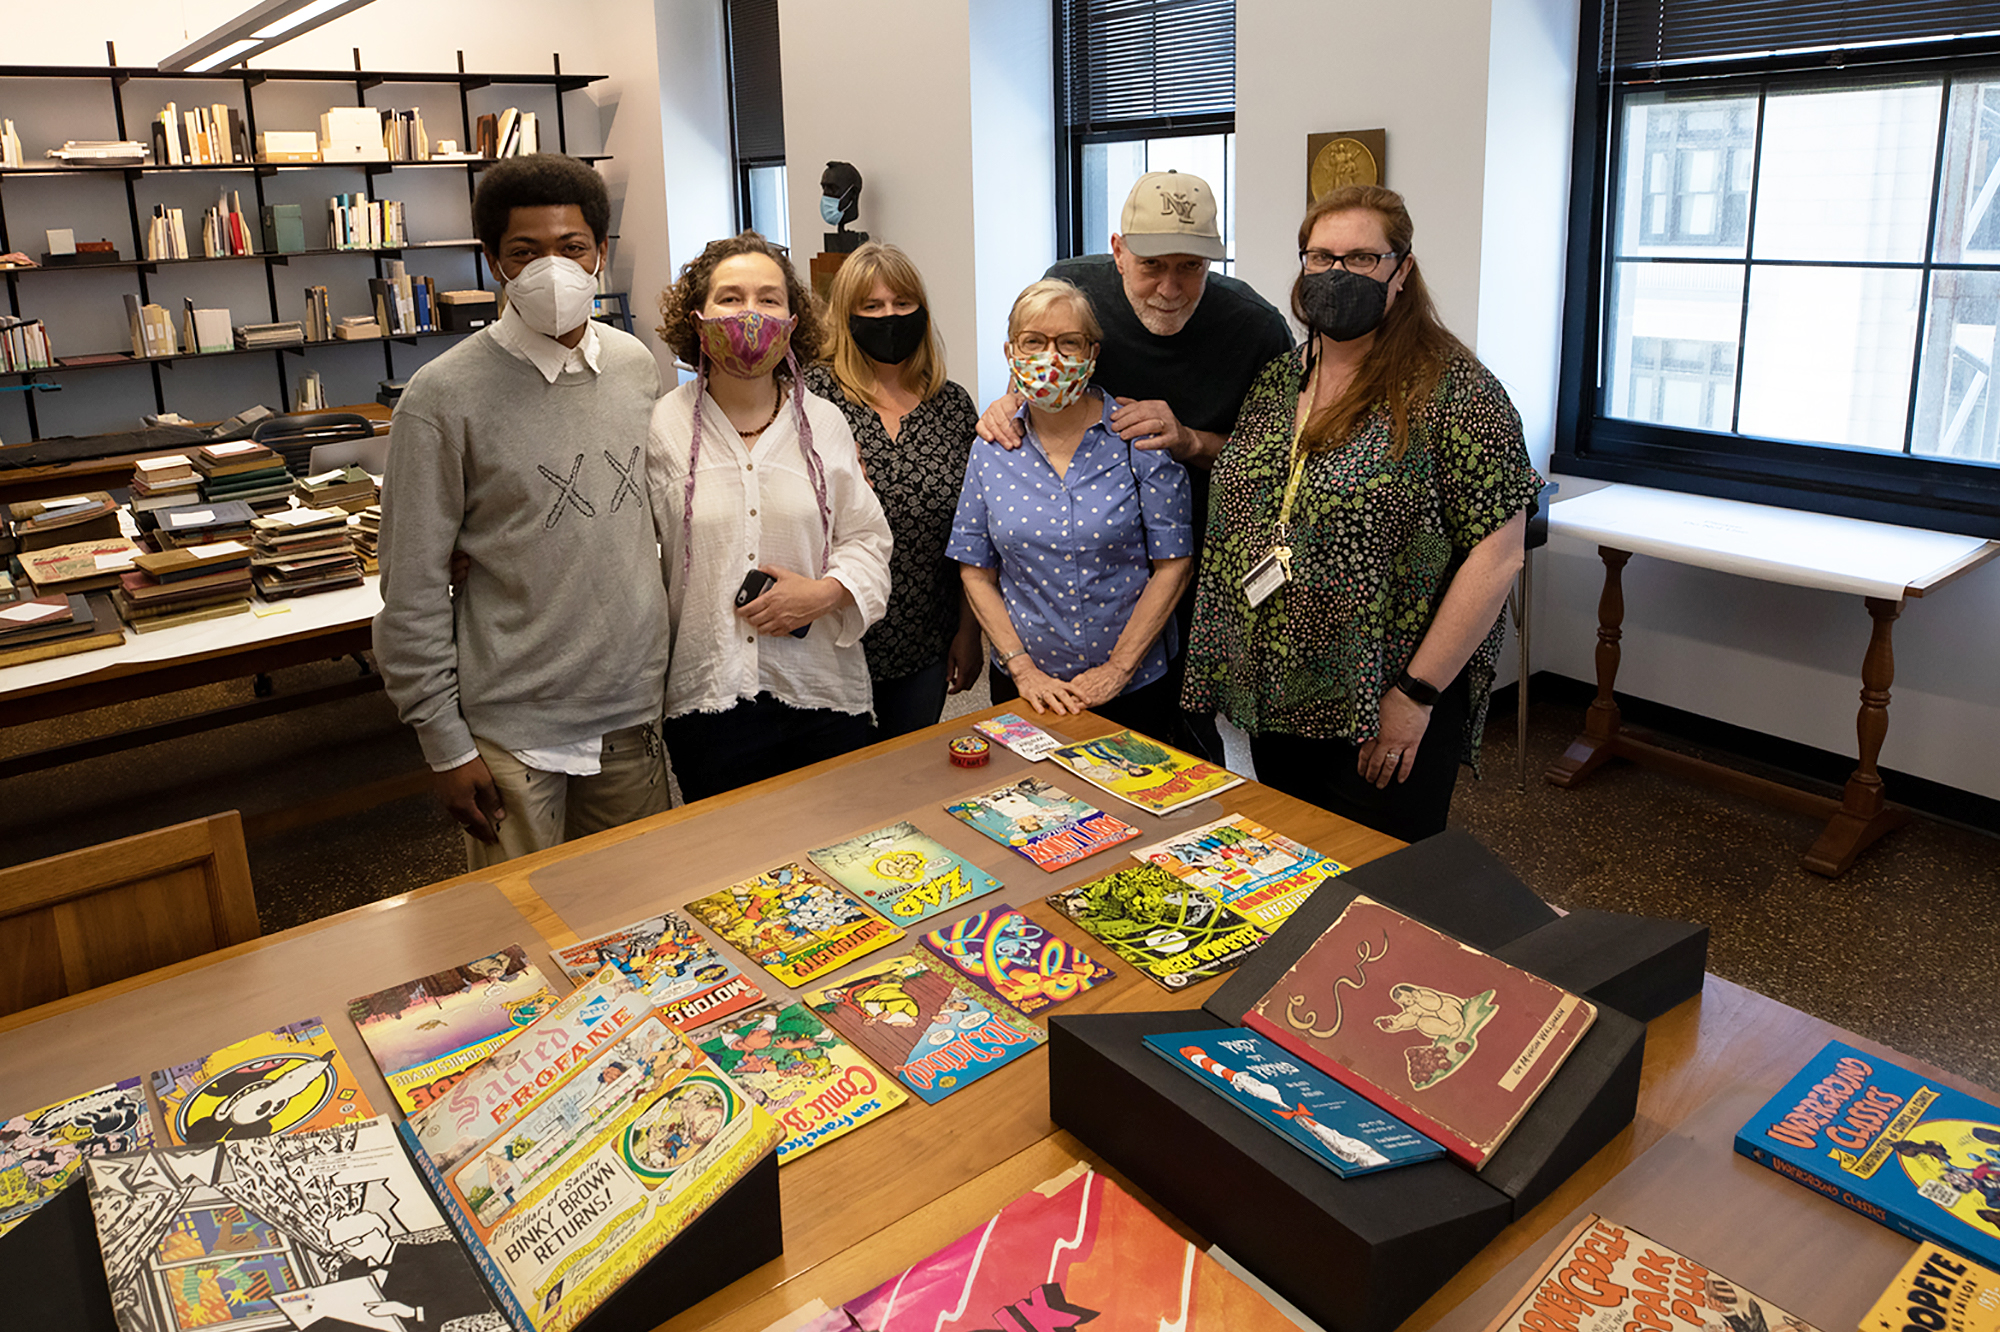 Adler, his wife and library staff pose in front of comix collection